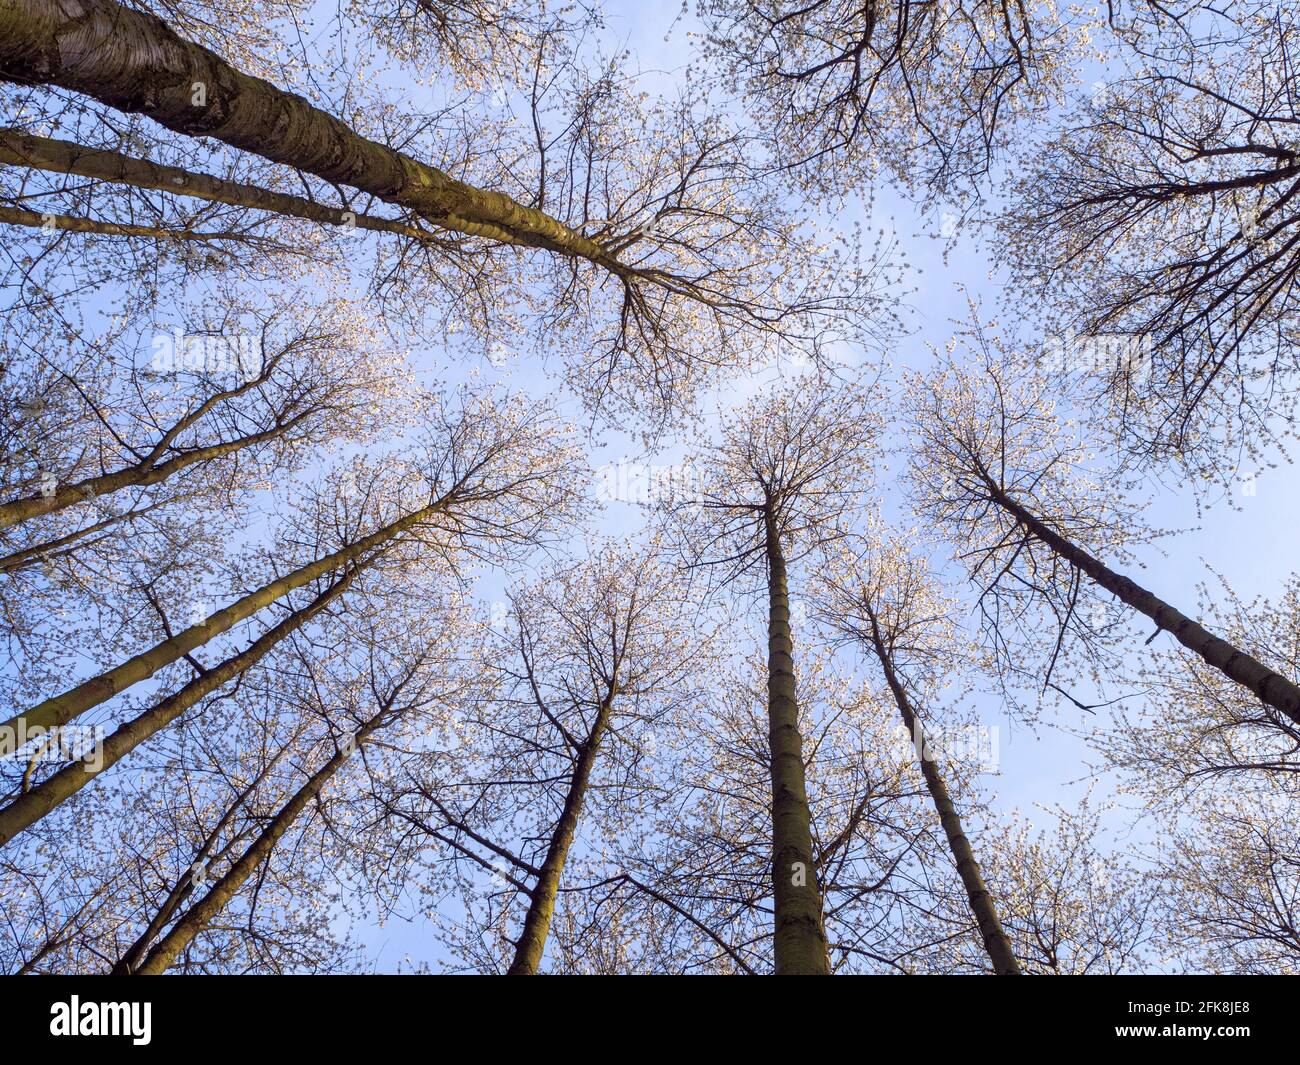 Tall Wild Cherry Trees in a woodland, reaching for the sky. Crown shyness with blossom against a blue sky in fine Spring weather. Stock Photo